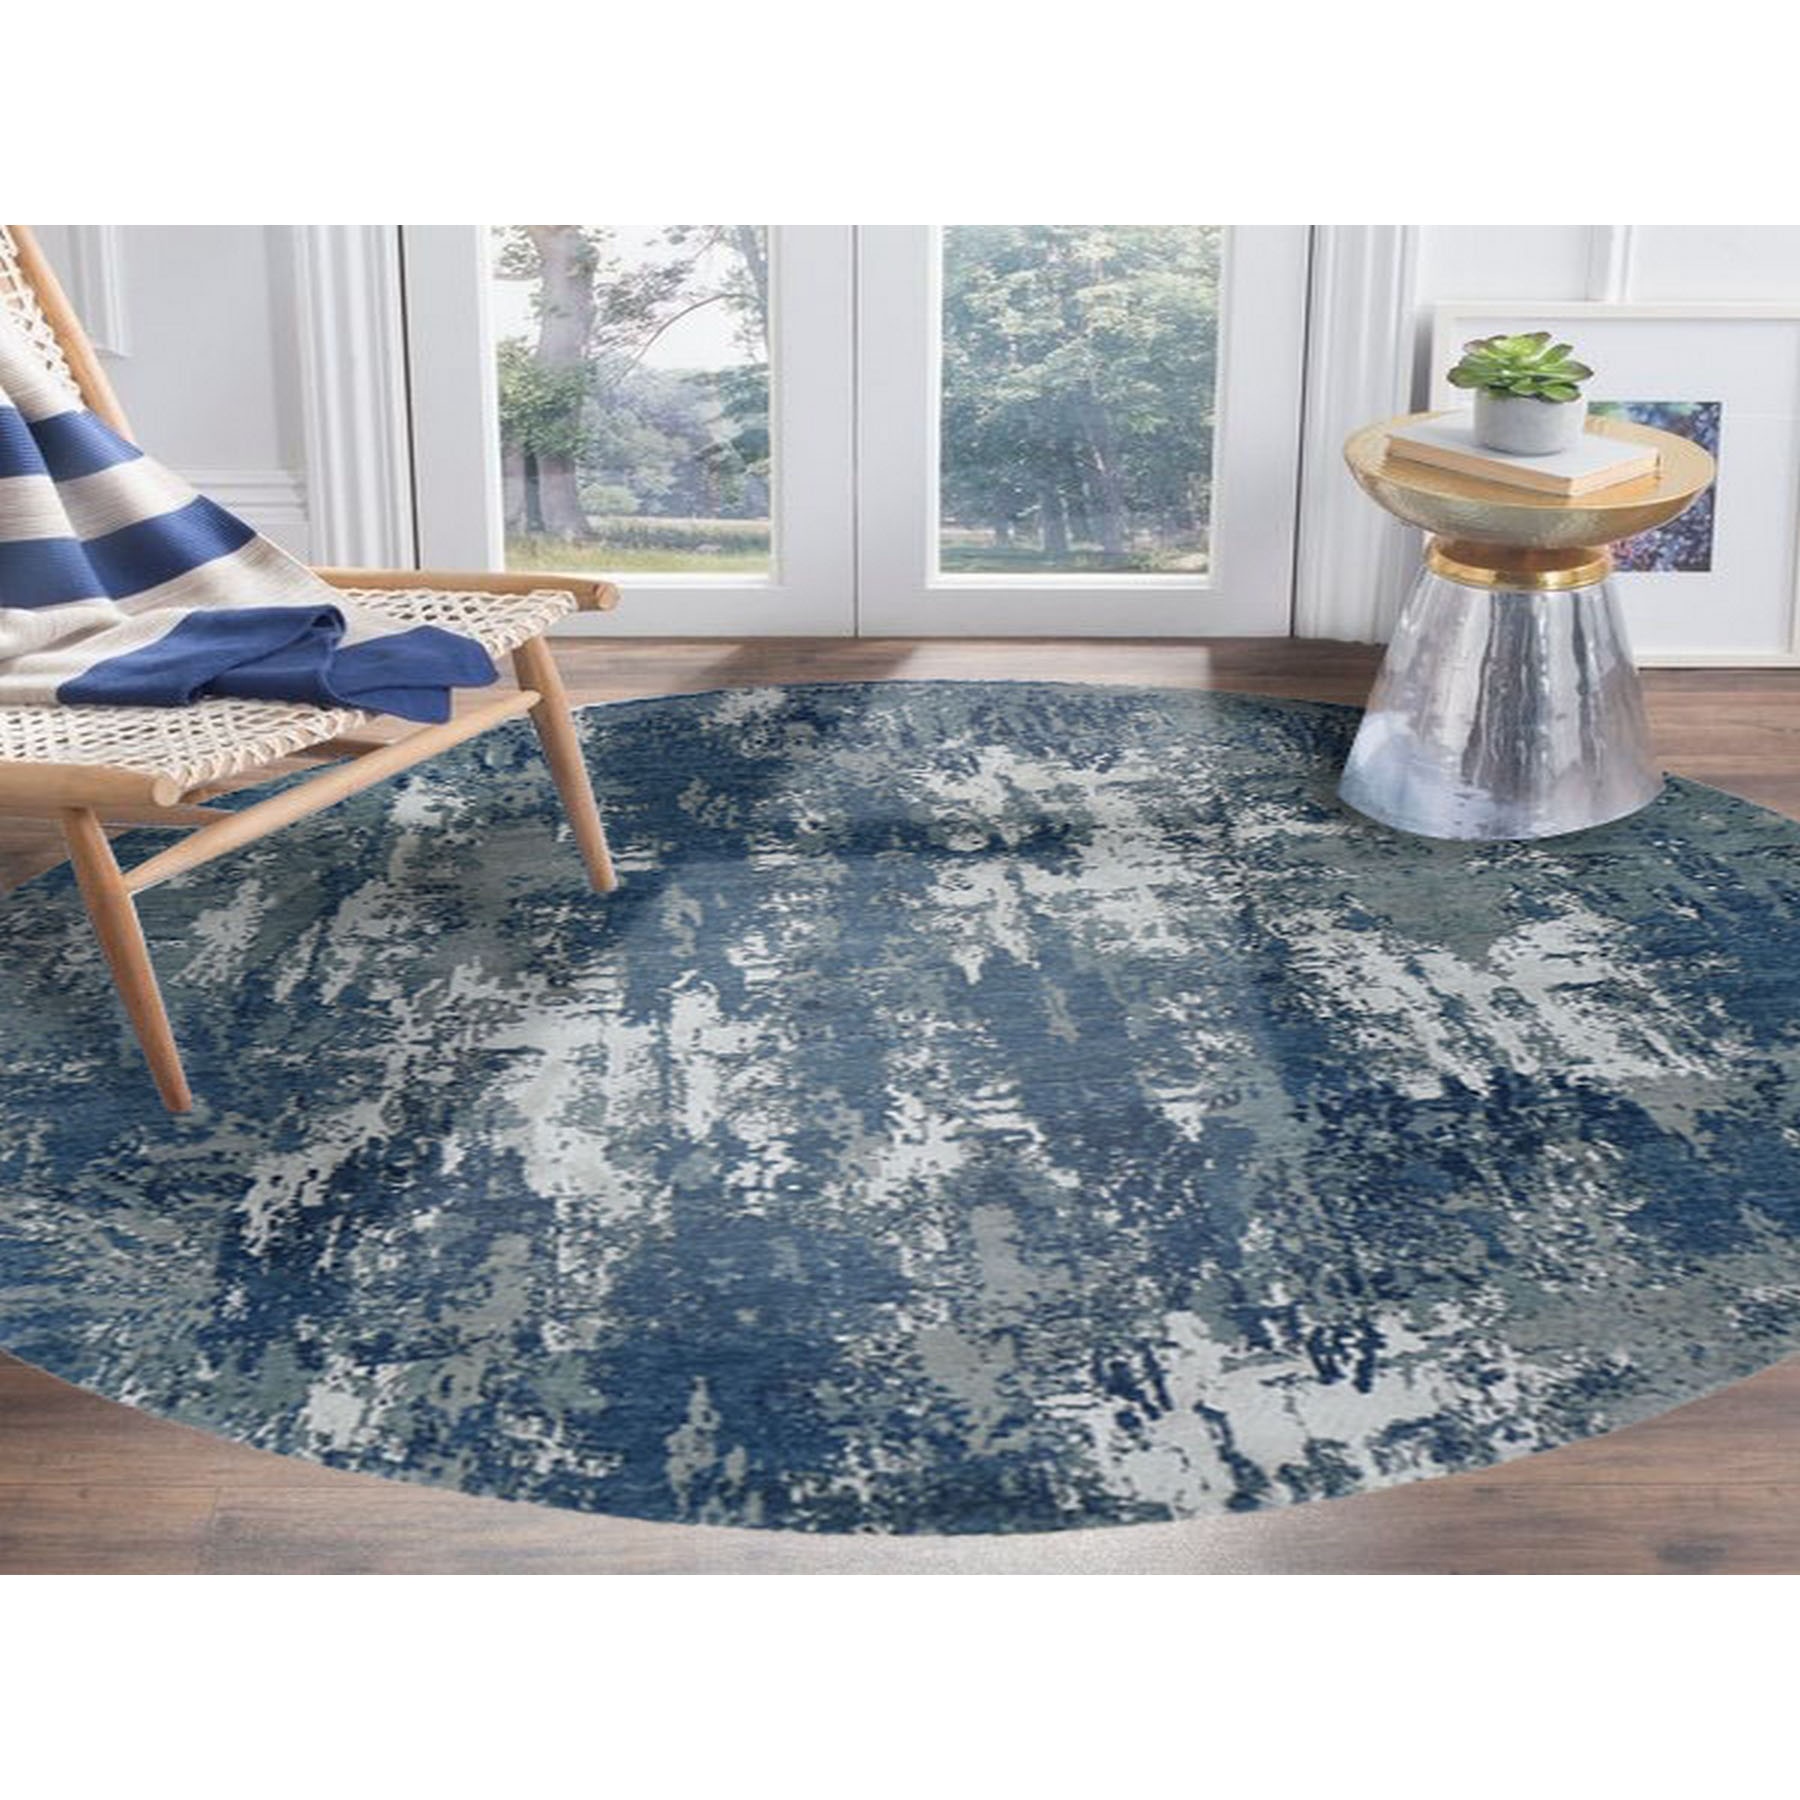 8-1 x8-1  Blue Abstract Design Wool and Pure Silk Hand Knotted Round Oriental Rug 